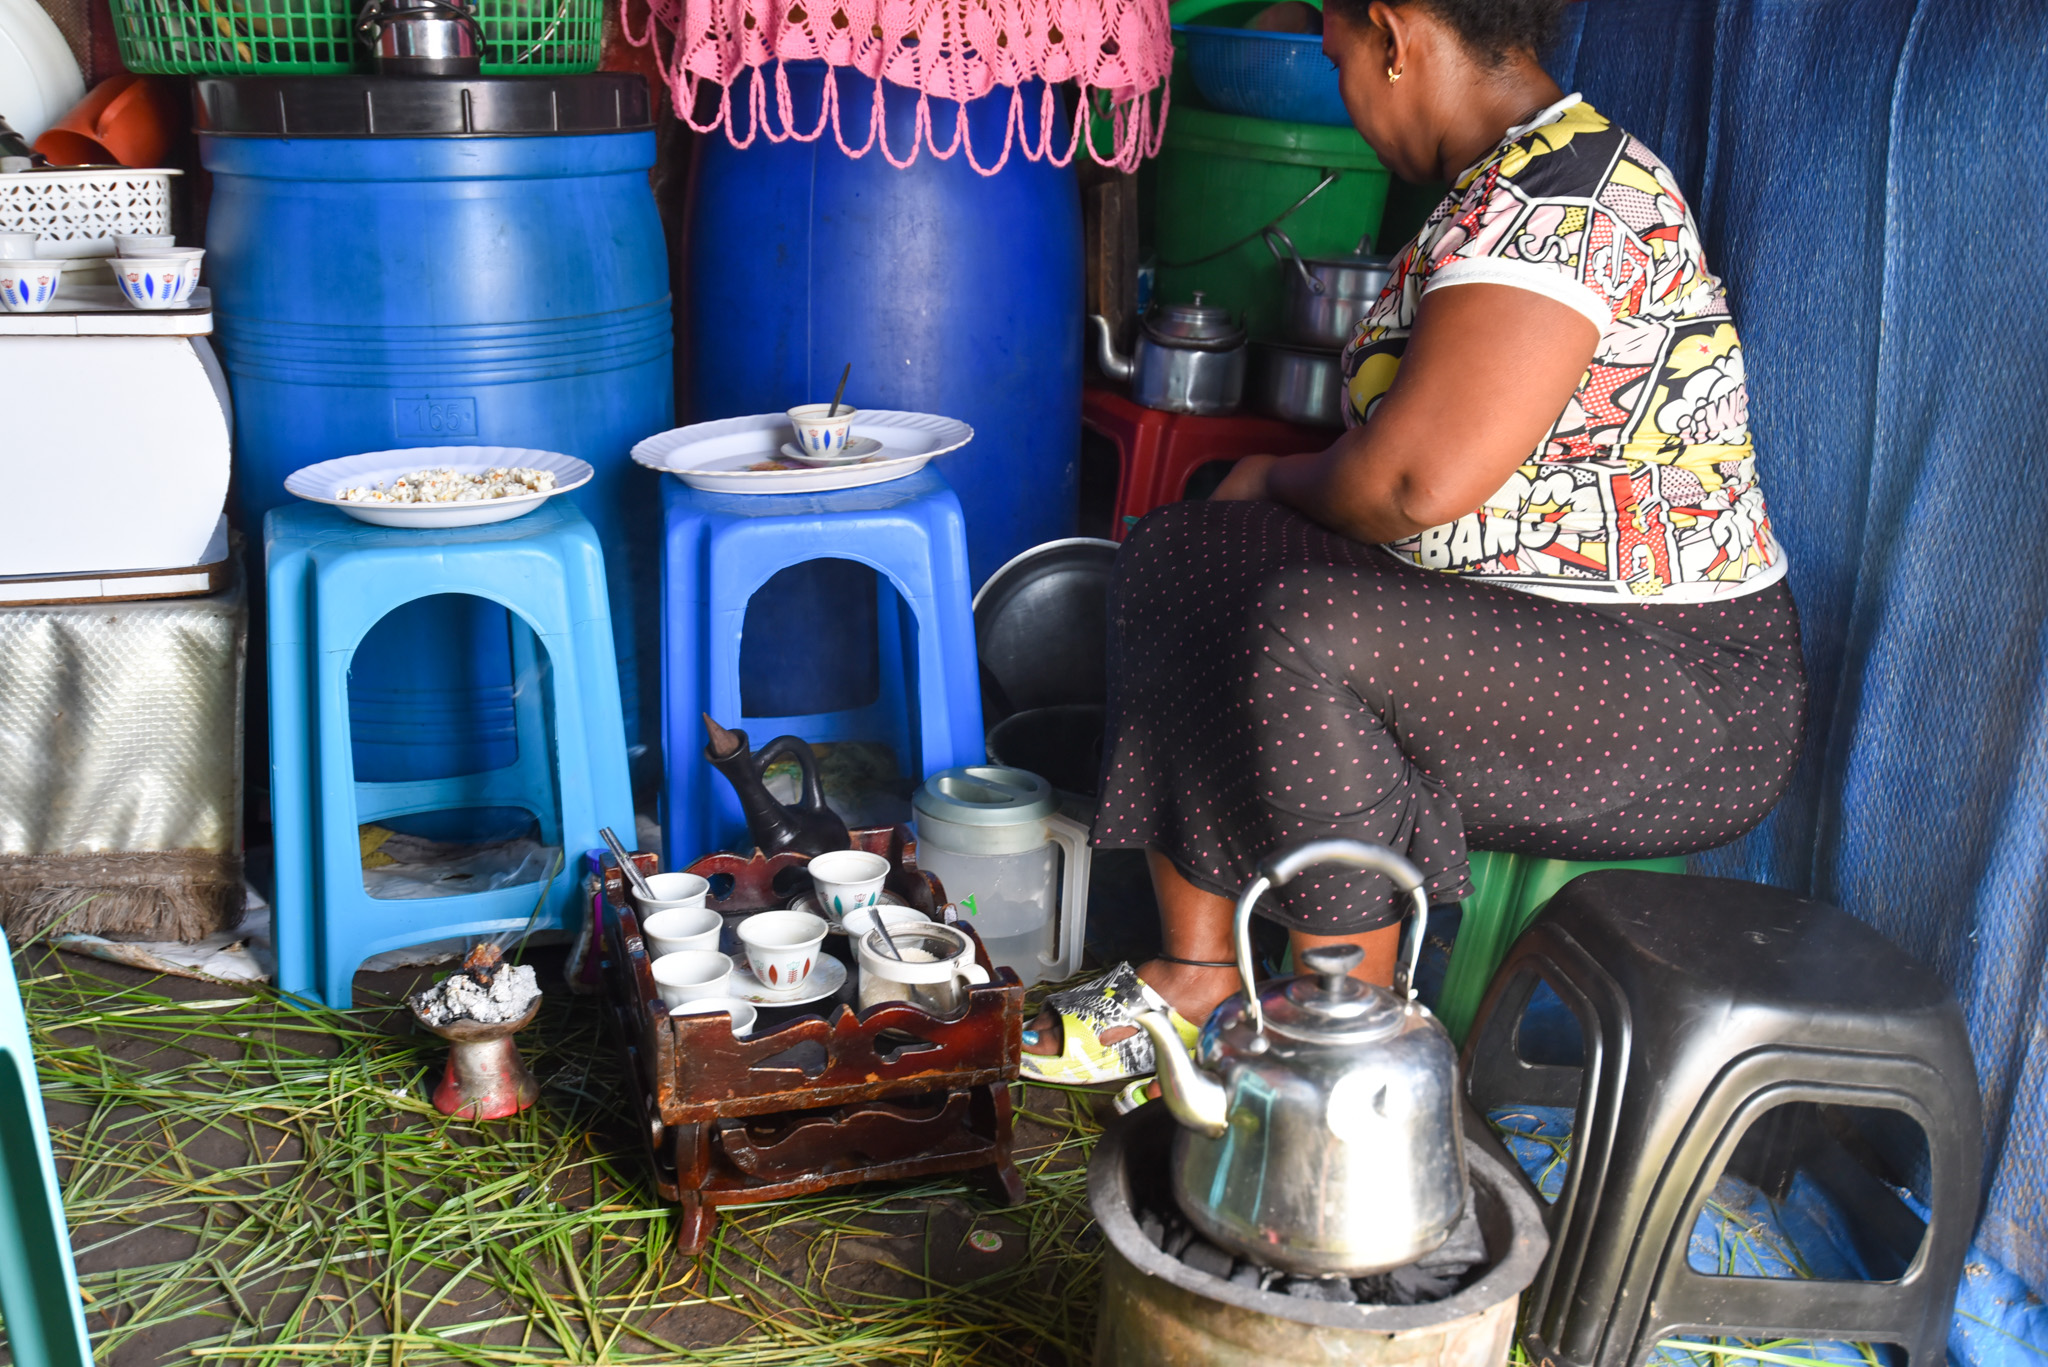 Almaz prepares the traditional coffee to serve her customers.